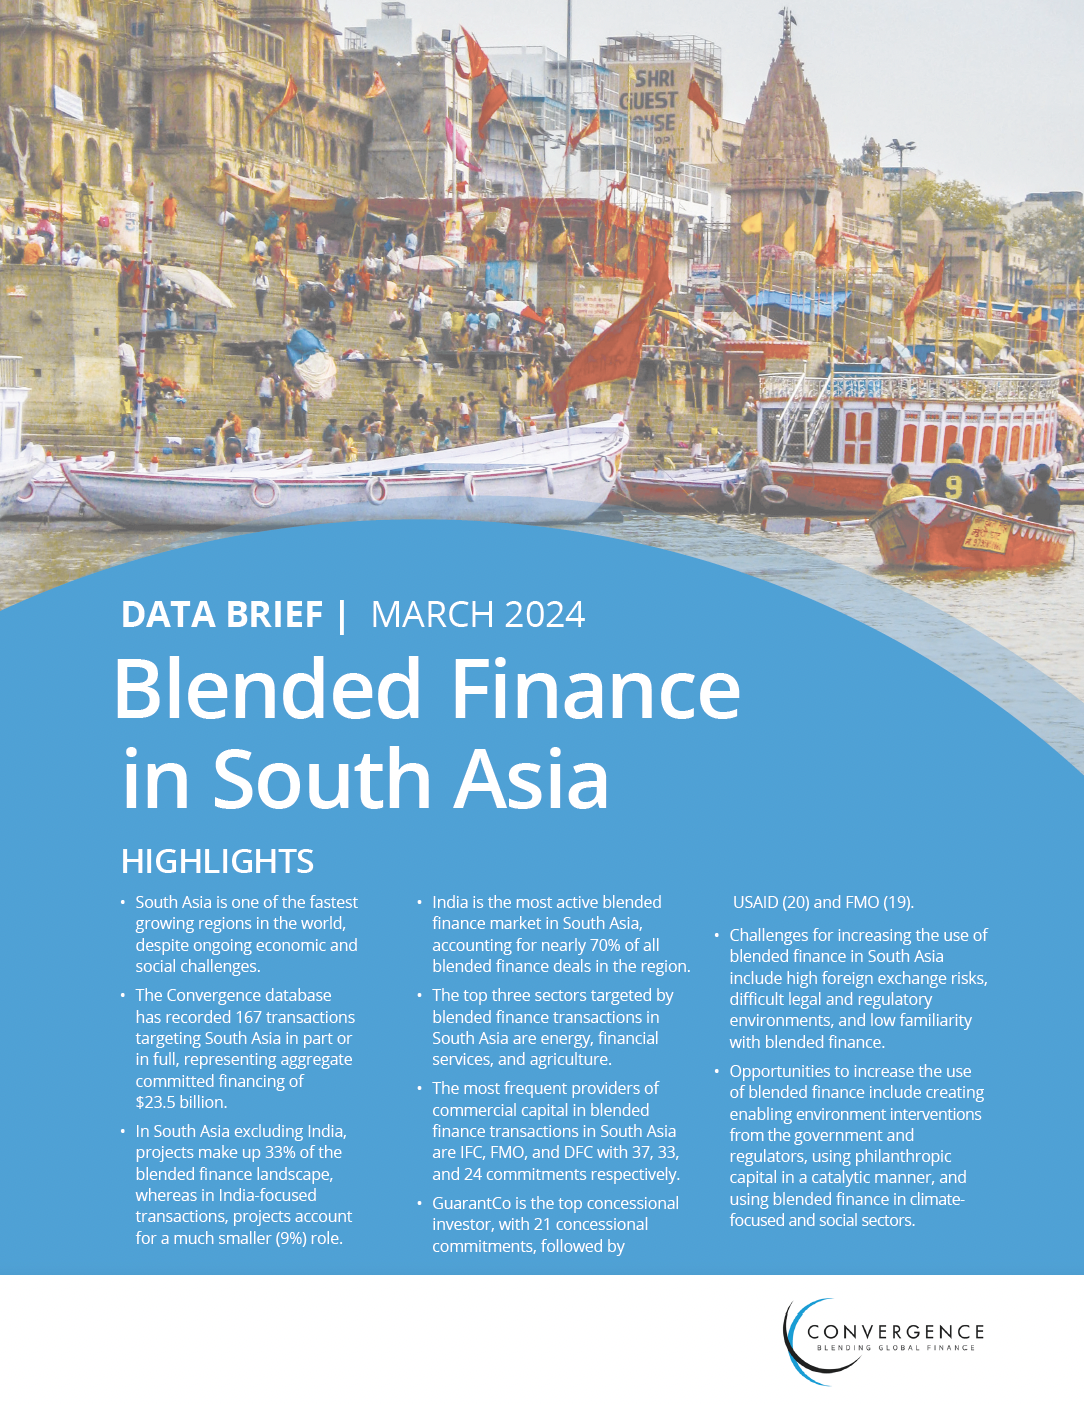 Blended Finance in South Asia